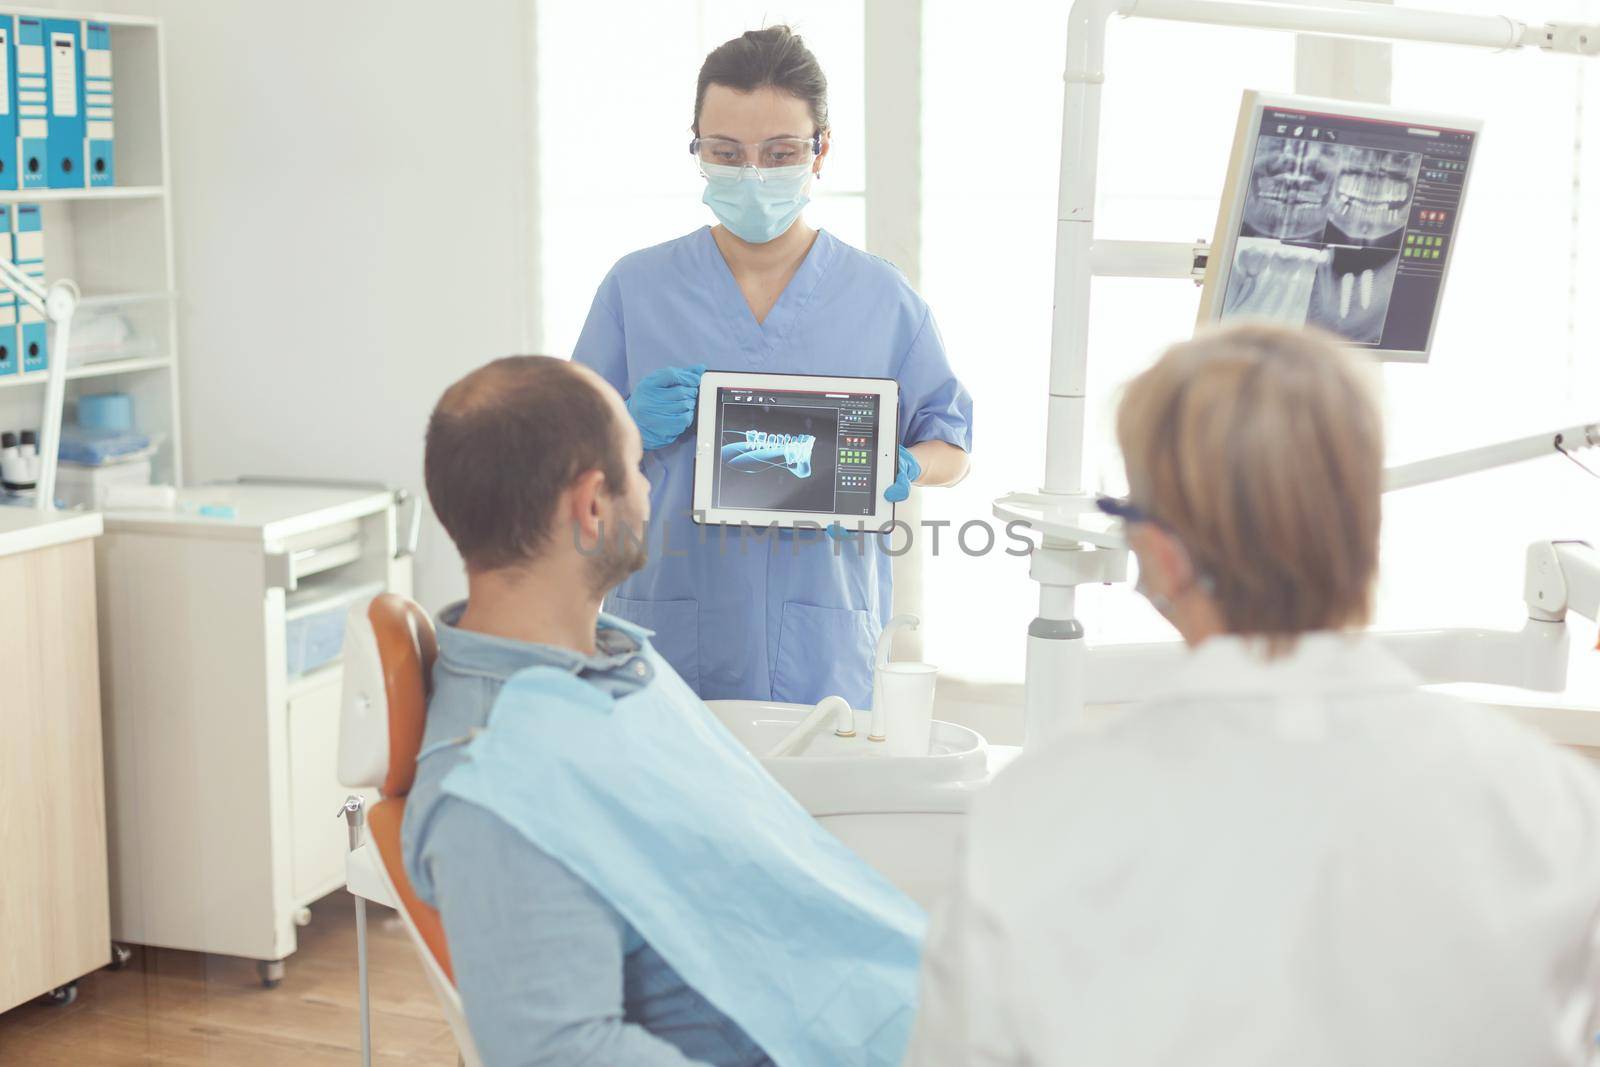 Stomatologist nurse pointing on digital screen explaining tooth x-ray to sick man sitting on dental chair in hospital stomatological office. Dentist doctor discussing toothache treatment